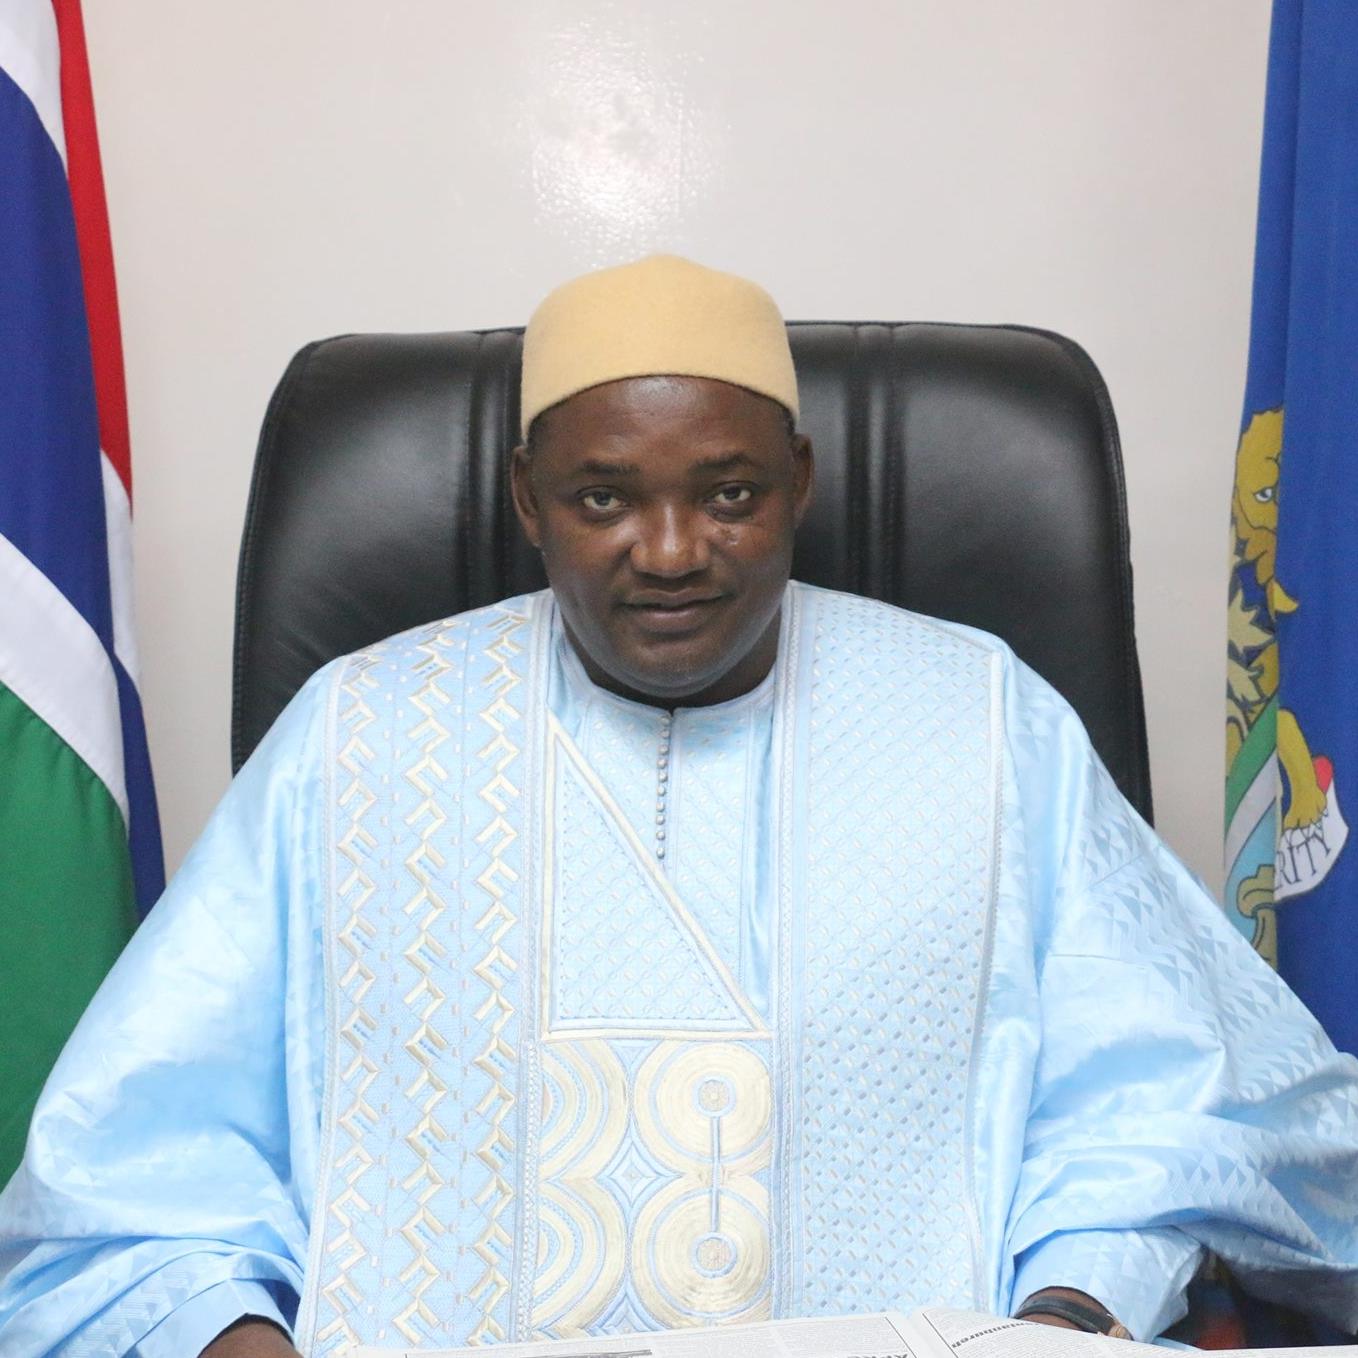 New Year Statement by  His Excellency, Mr Adama Barrow